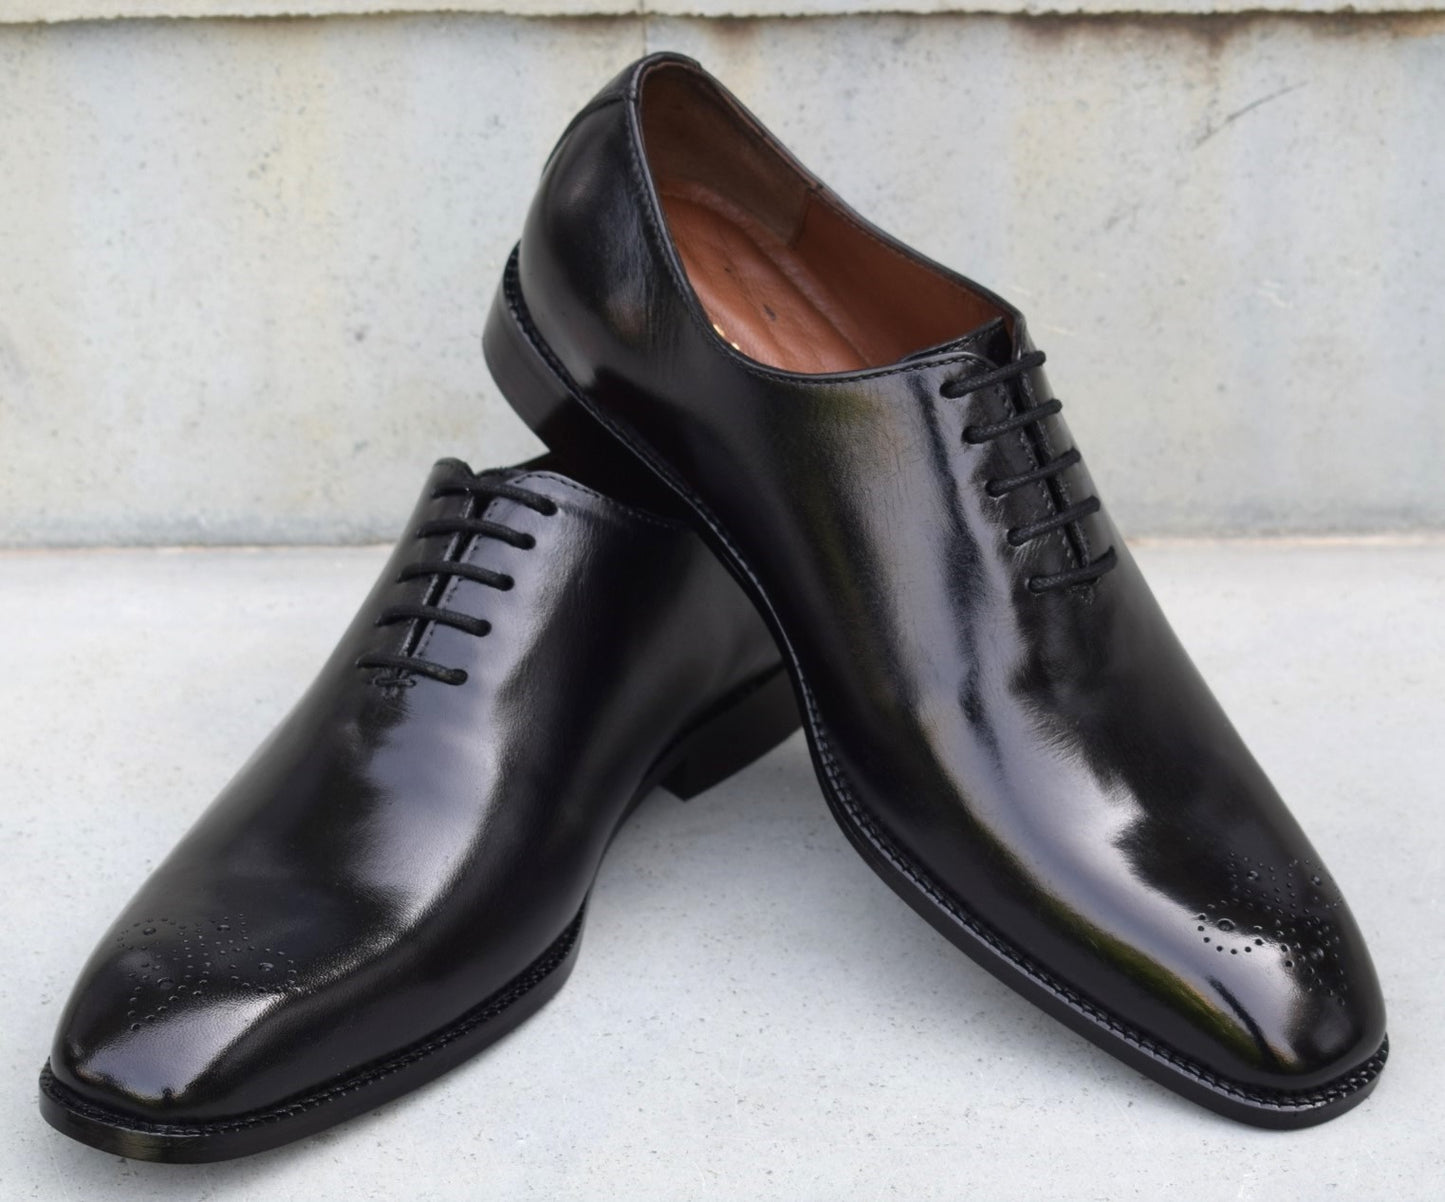 HandPatina Leather Sole Shoes